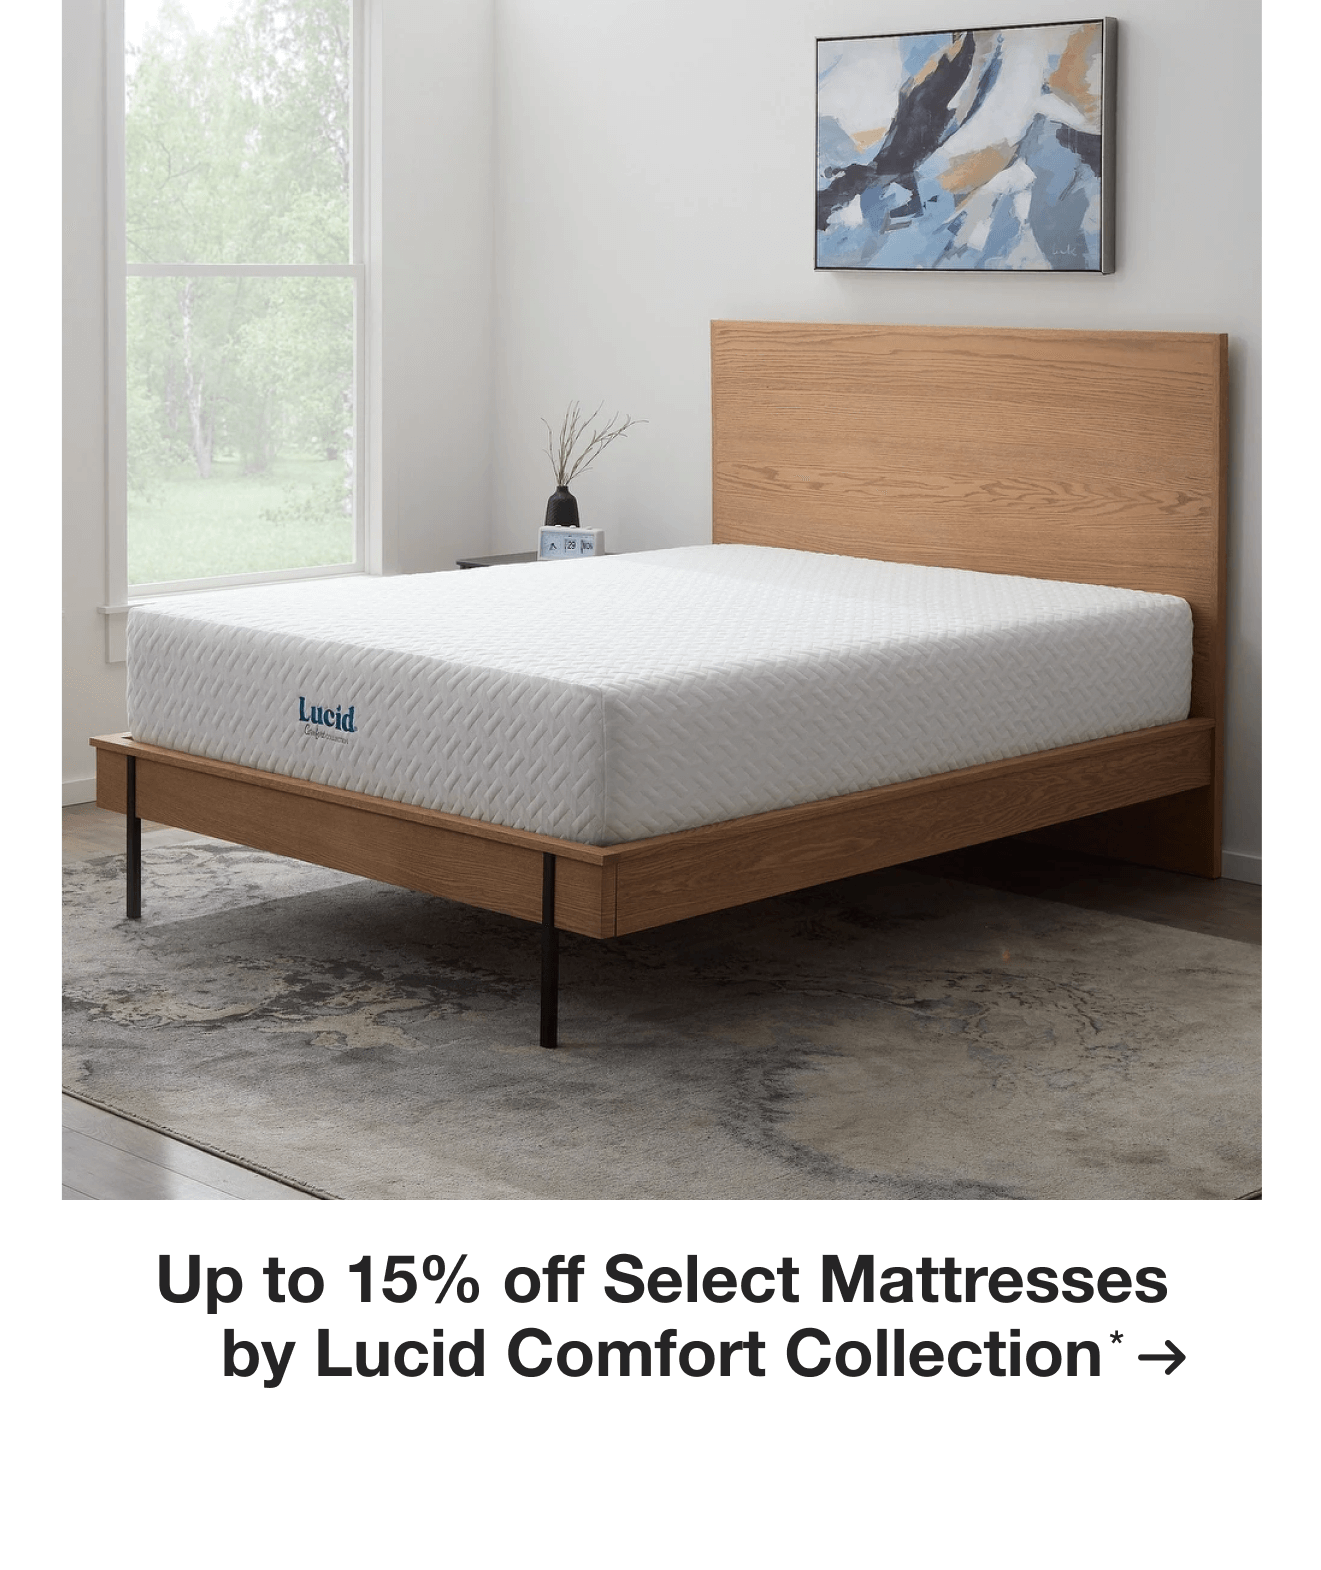 Up to 15% off Select Mattresses by Lucid Comfort Collection*